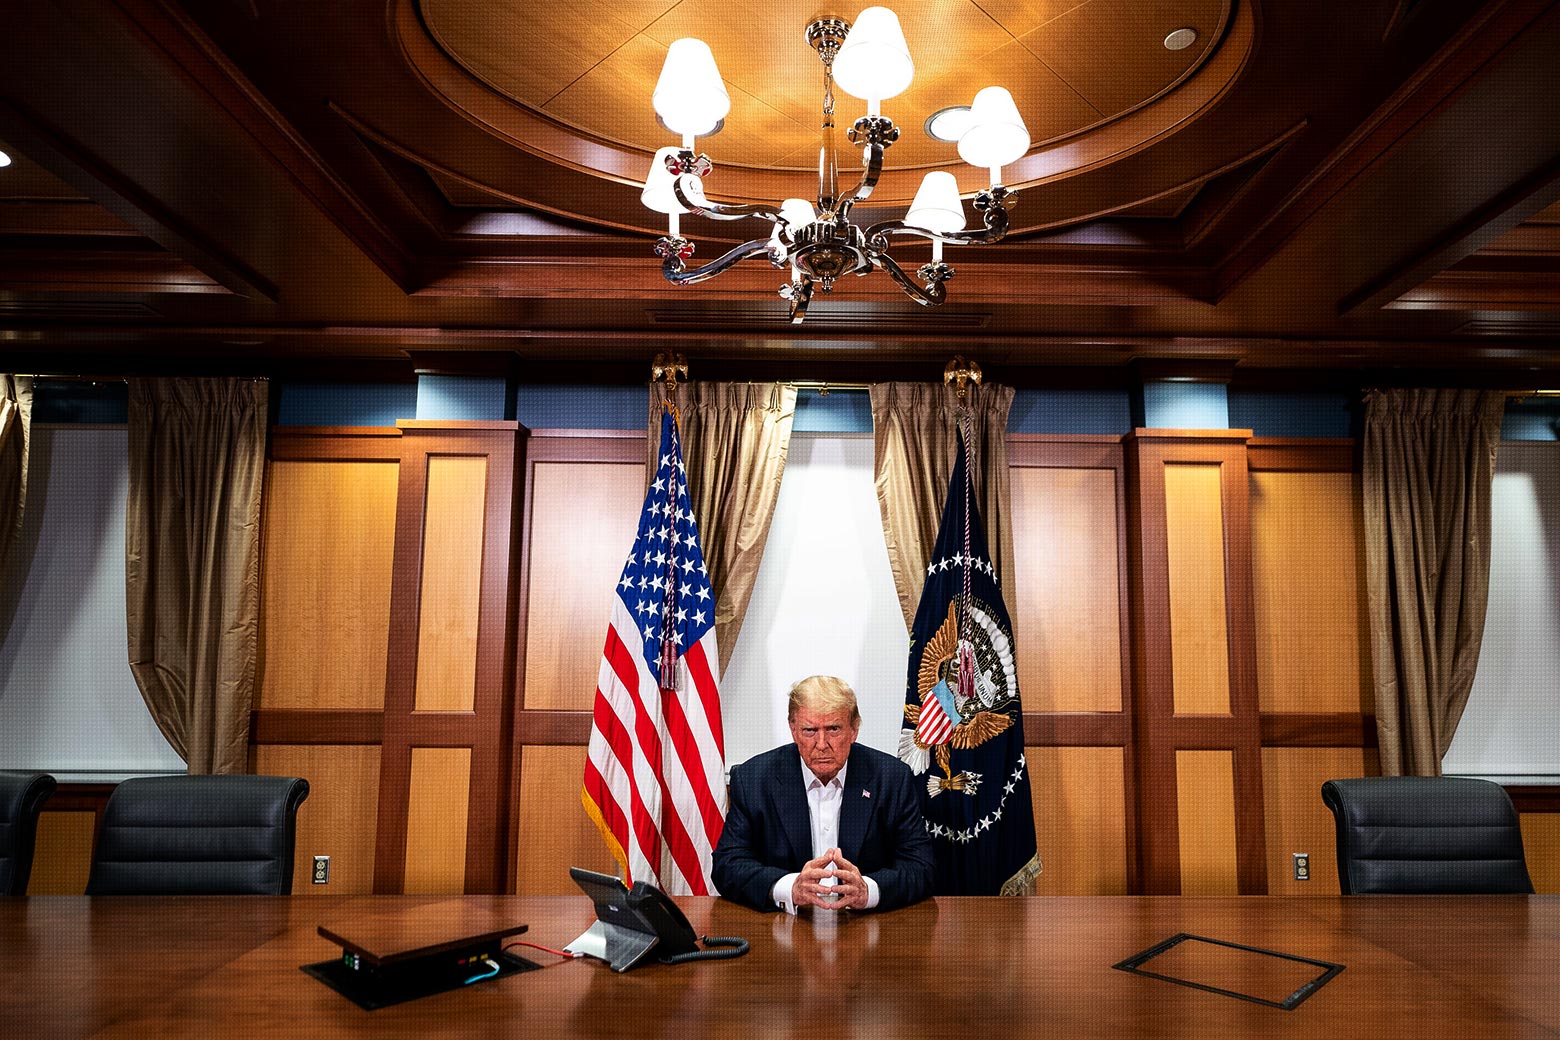 Trump sits hands clasped at a large conference room table with a speaker phone near him.